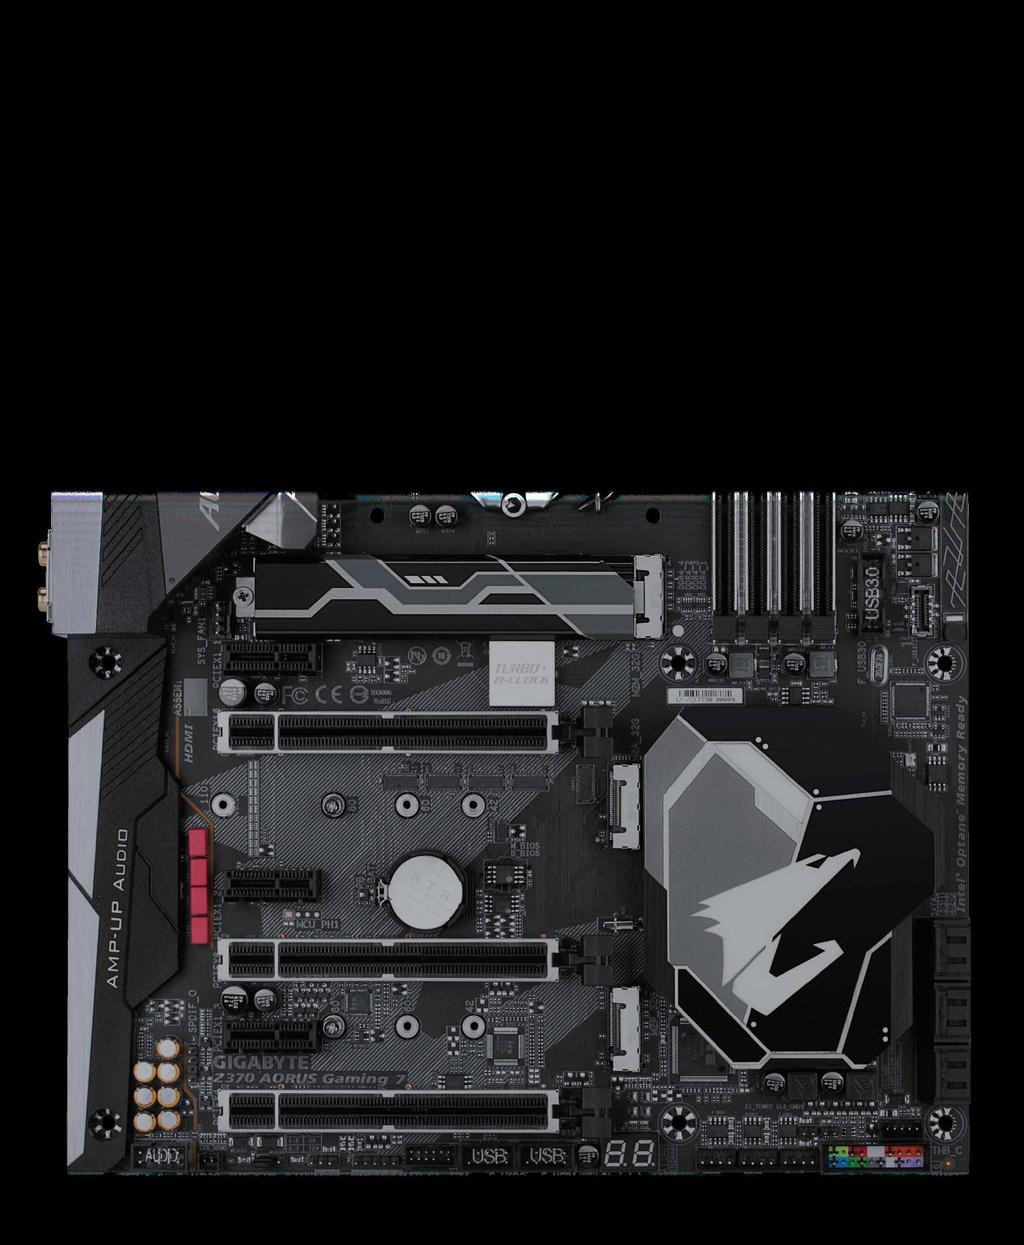 Triple PCIe Gen3 x4 M.2 M.2 Up to 32 Gb/s* (PCIe Gen3 x4 M.2) AORUS Gaming Motherboards are focused on delivering M.2 technology to enthusiasts who want to maximize their system s potential.